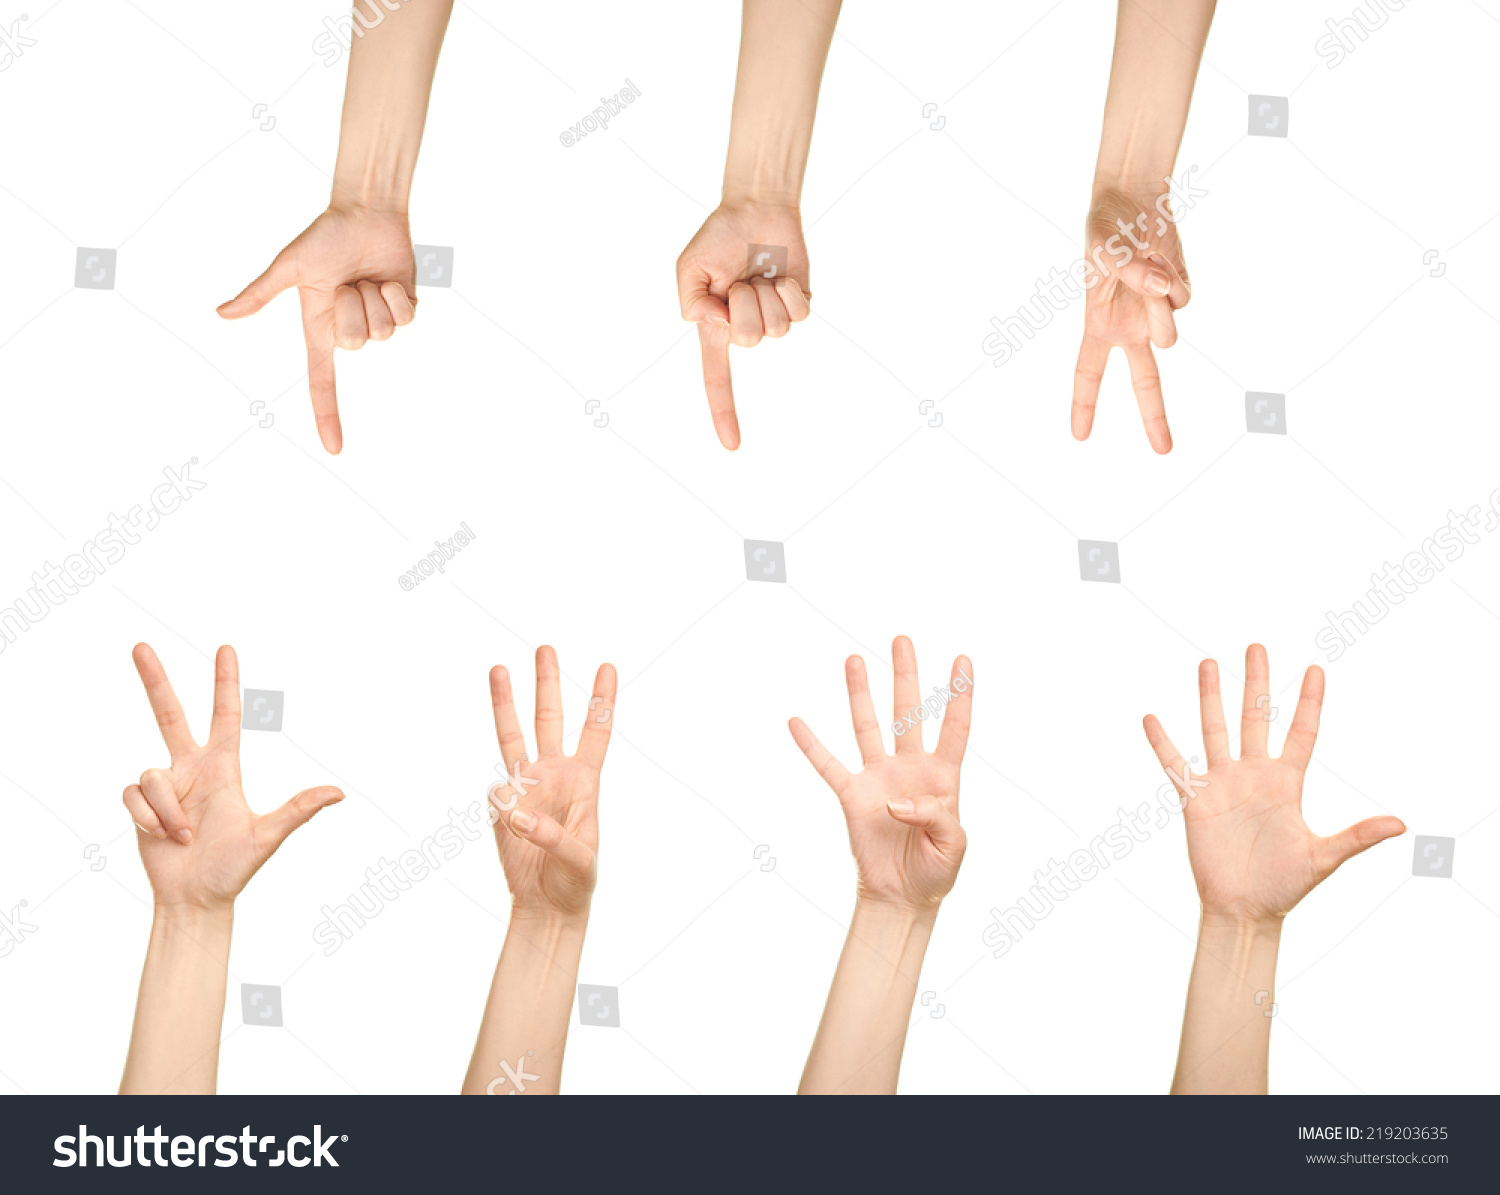 Female caucasian hand number gestures, one to five, isolated over the white background, set of six images #219203635